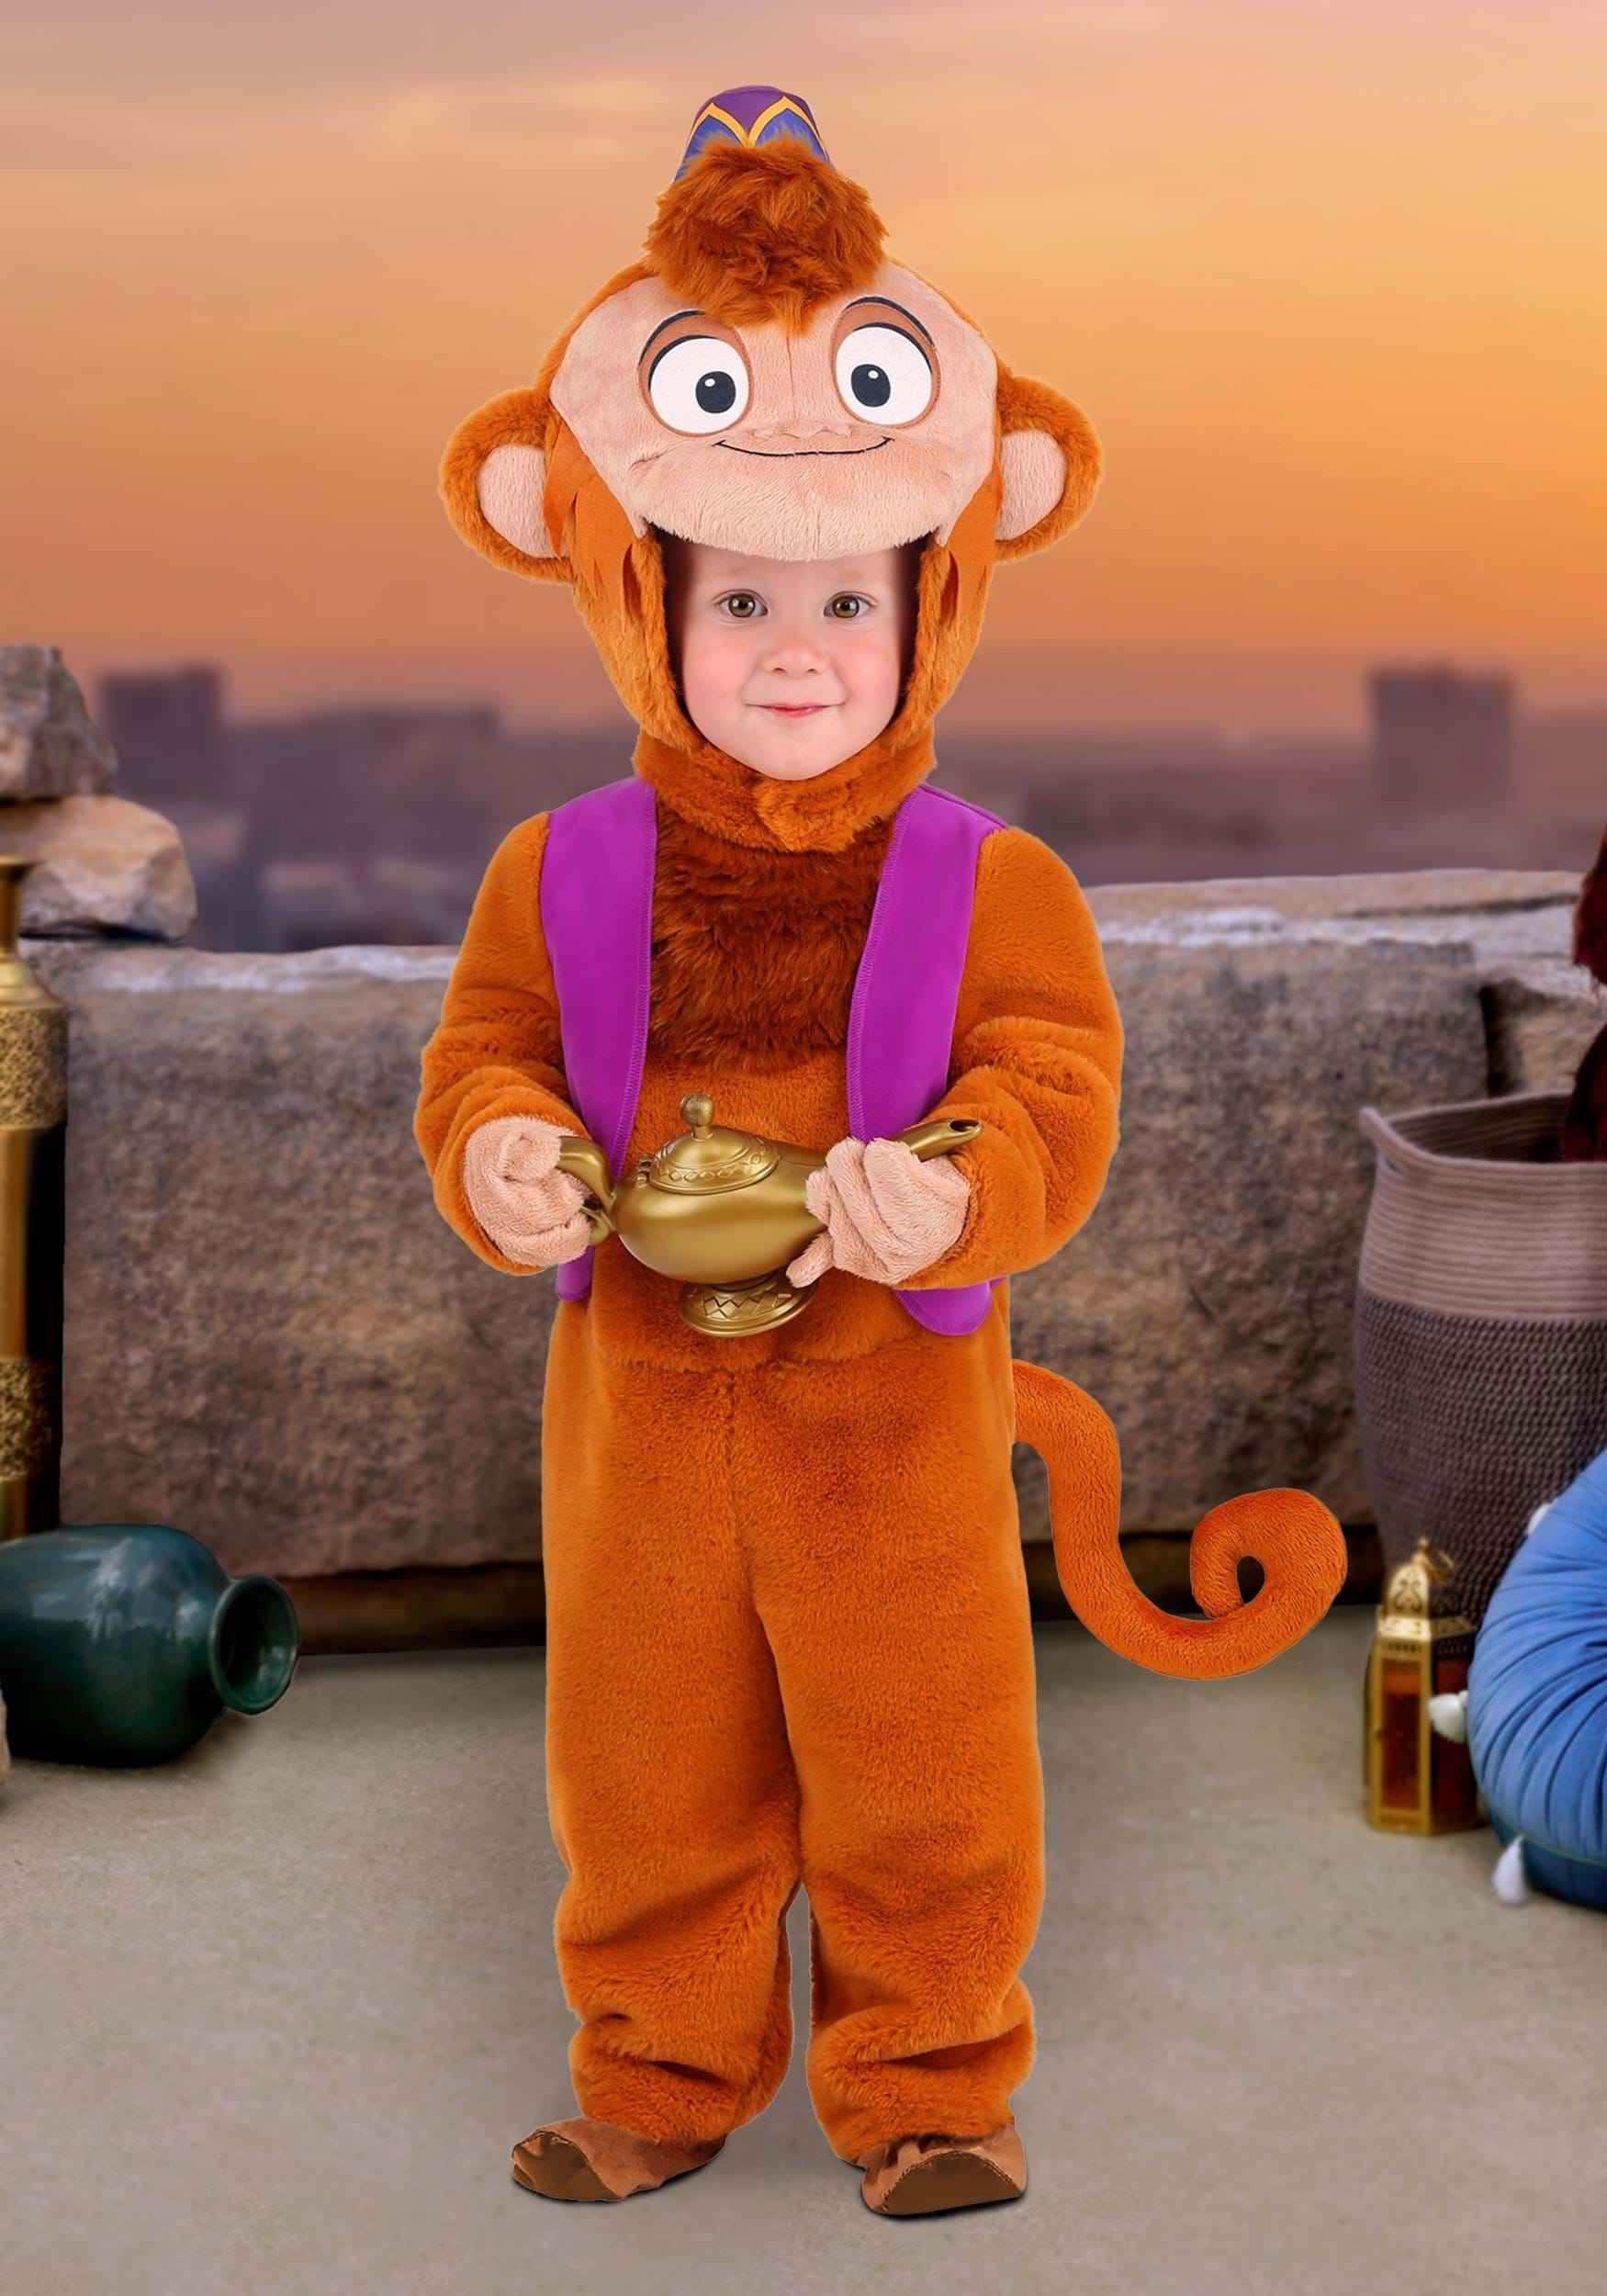 https://images.halloweencostumes.com/products/62872/1-1/aladdin-toddler-abu-deluxe-costume-1.jpg